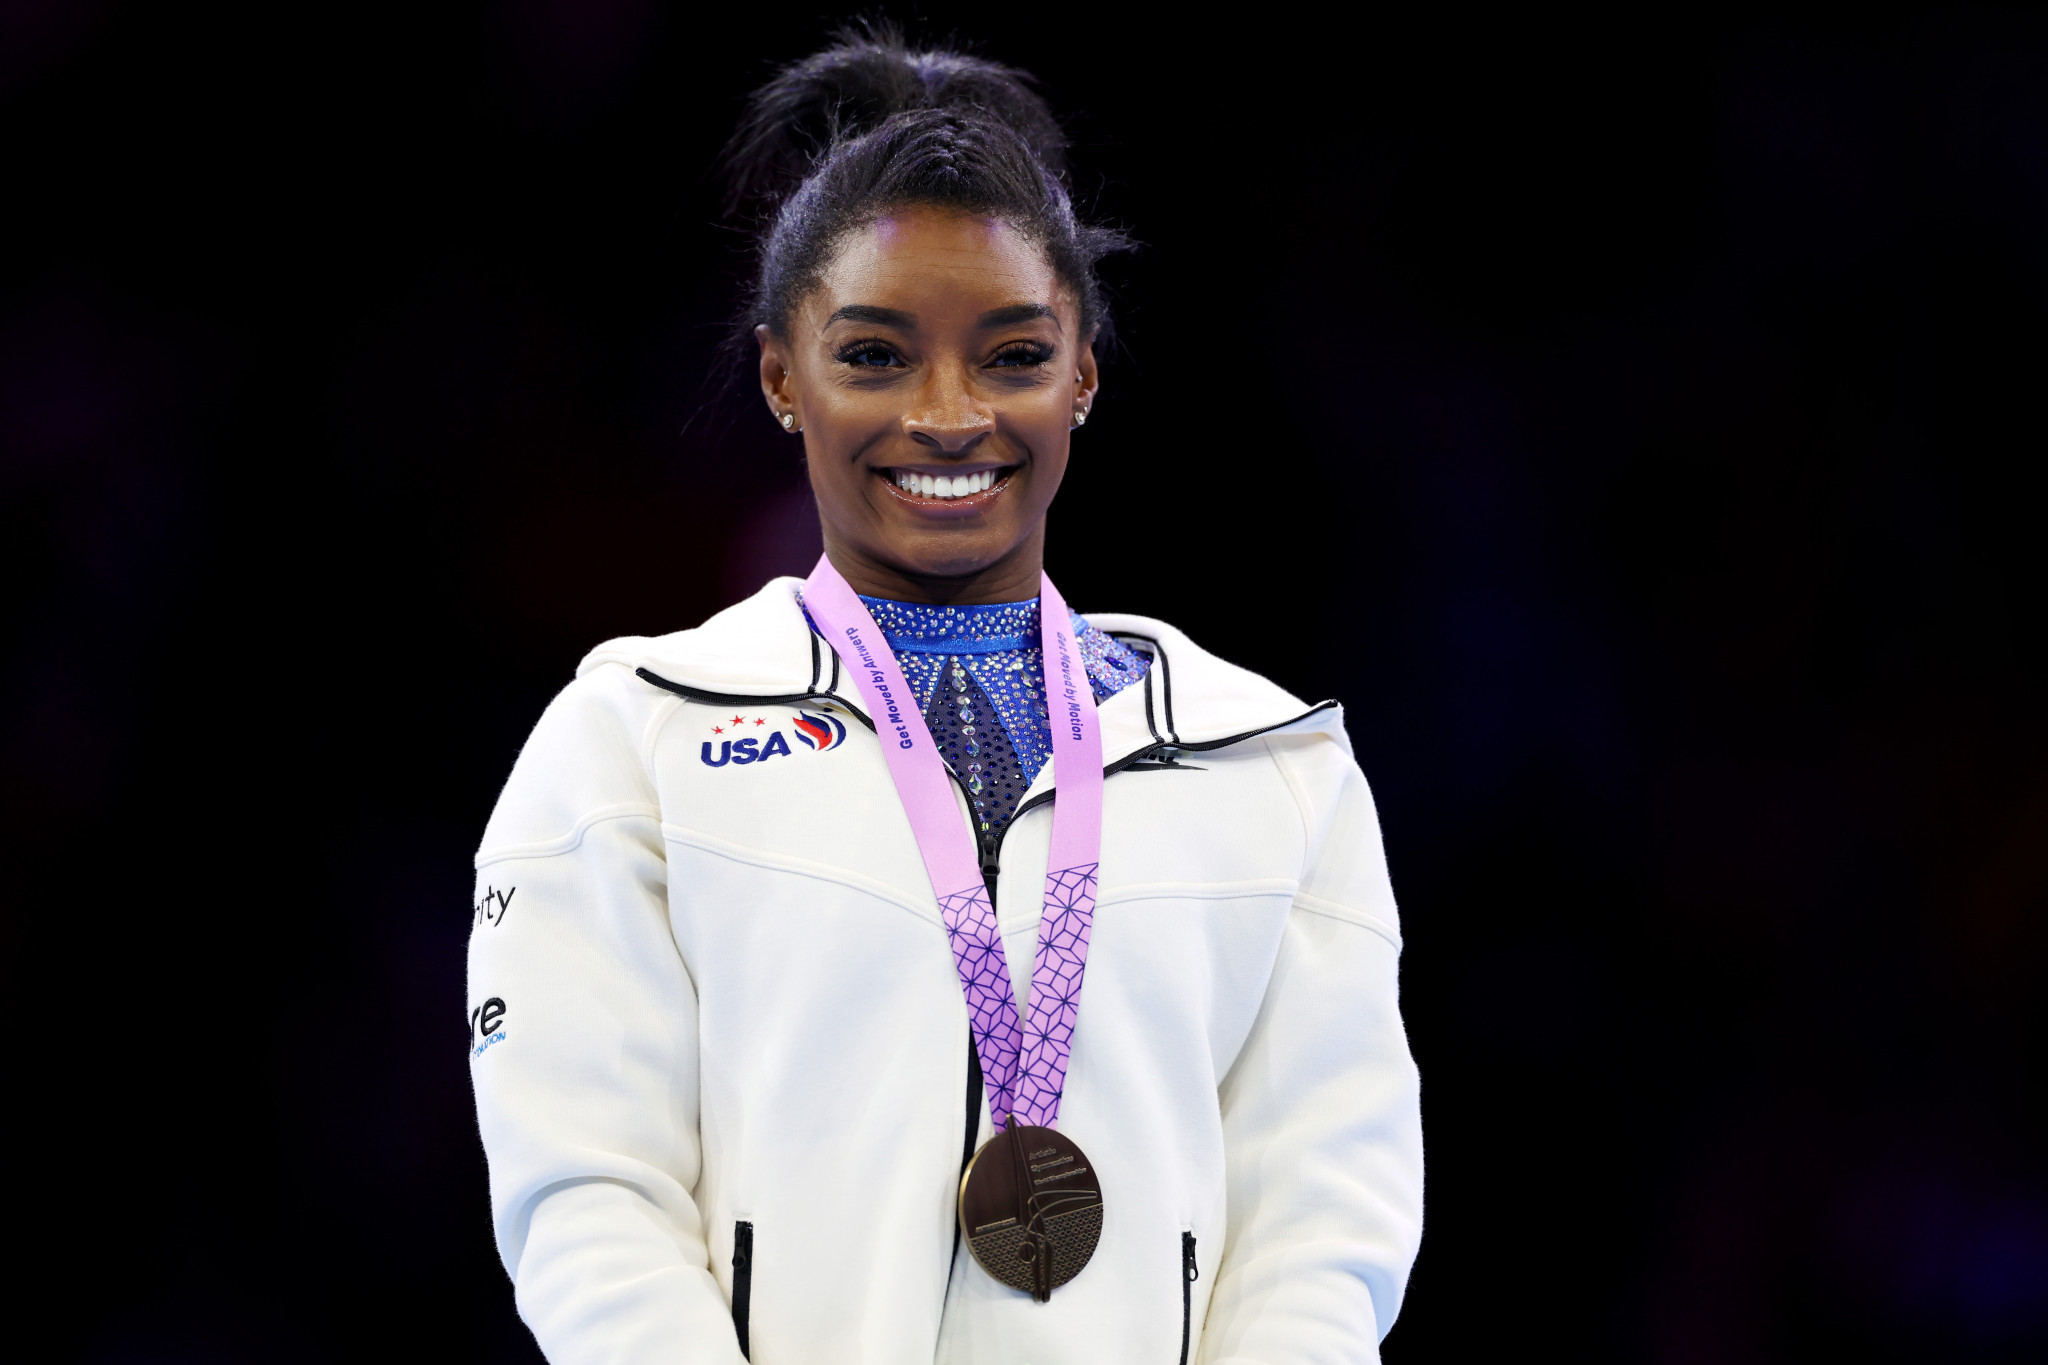 Simone Biles is all smiles after winning a record 21st gold medal at the World Artistic Gymnastics Championships ©Getty Images  